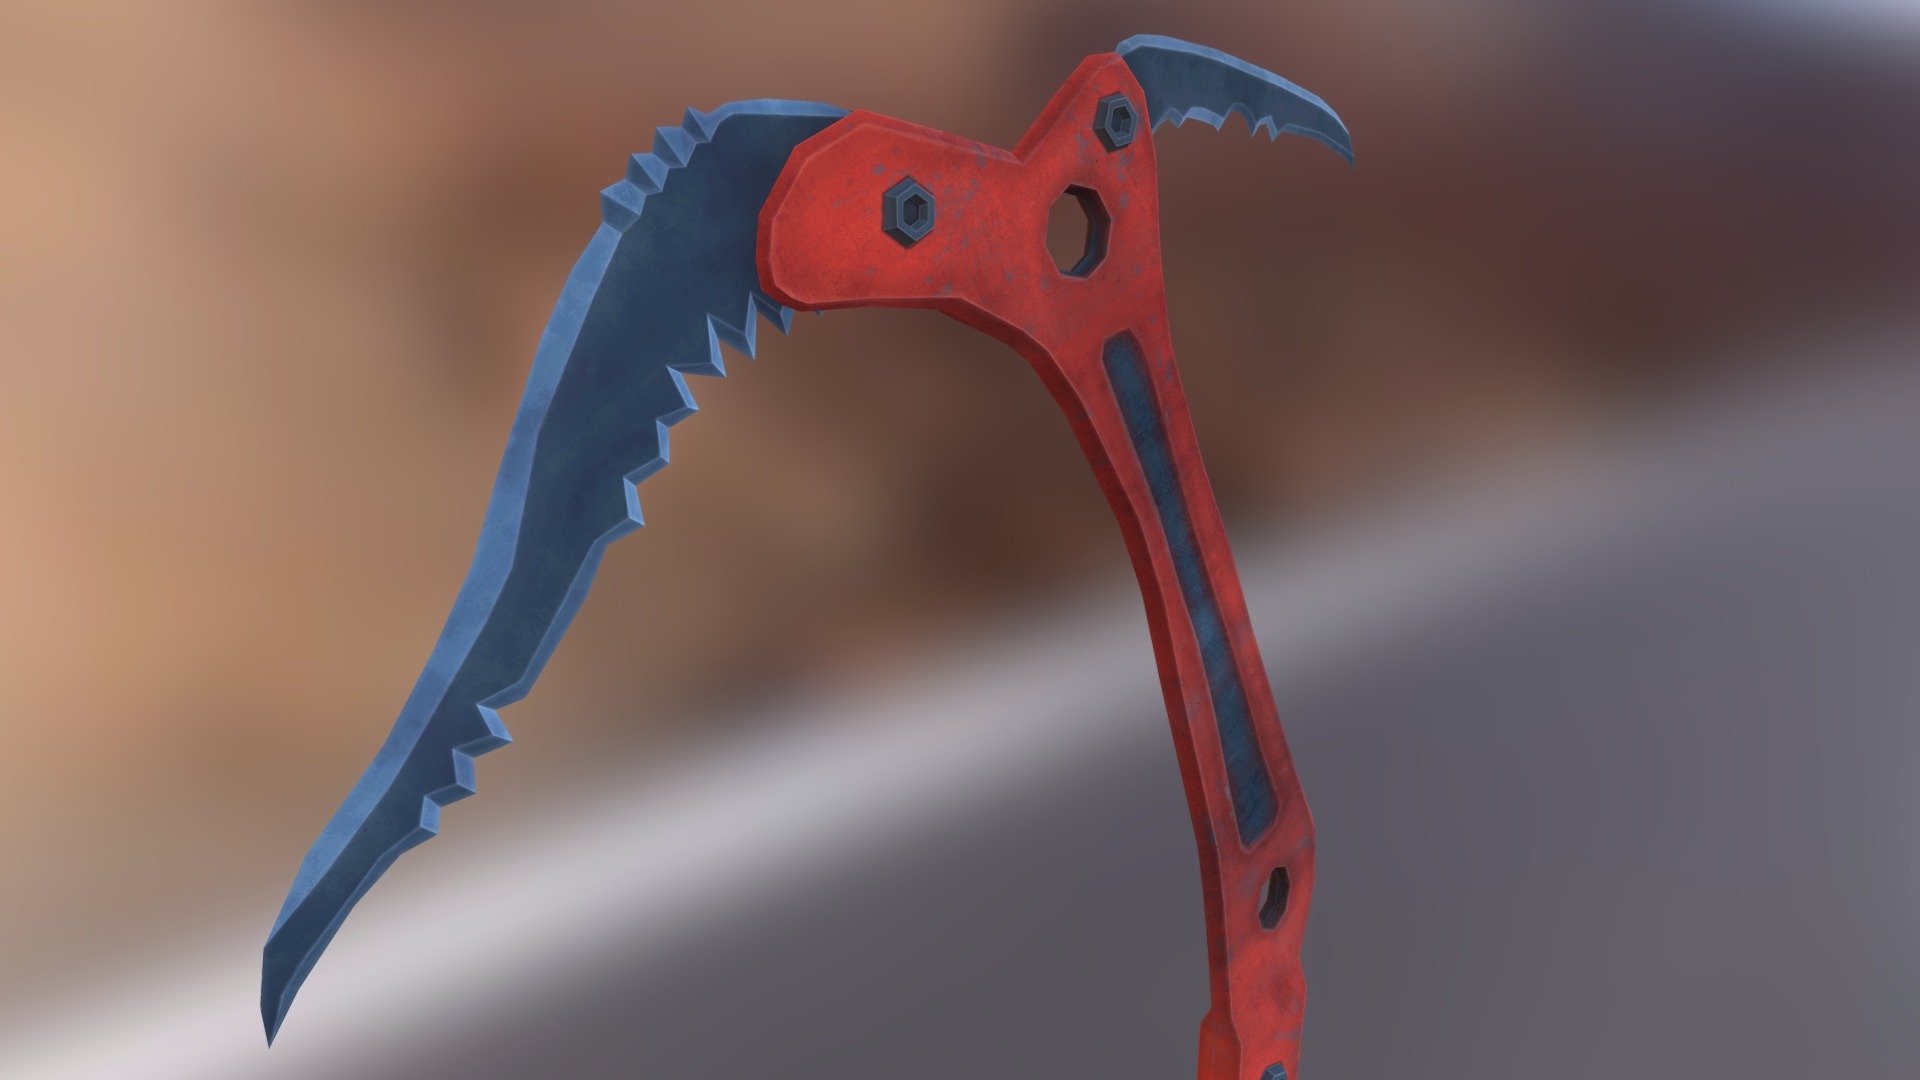 Climbing Axe  Very Detailed Climbing Axe / Grapple / Hook ready to be put into action.  Fits perfect for FPS / Third Person games.  ##Purchase &amp; Download ##25 $ - Climbing Axe - 3D model by GamePoly (@triix3d) 3d model